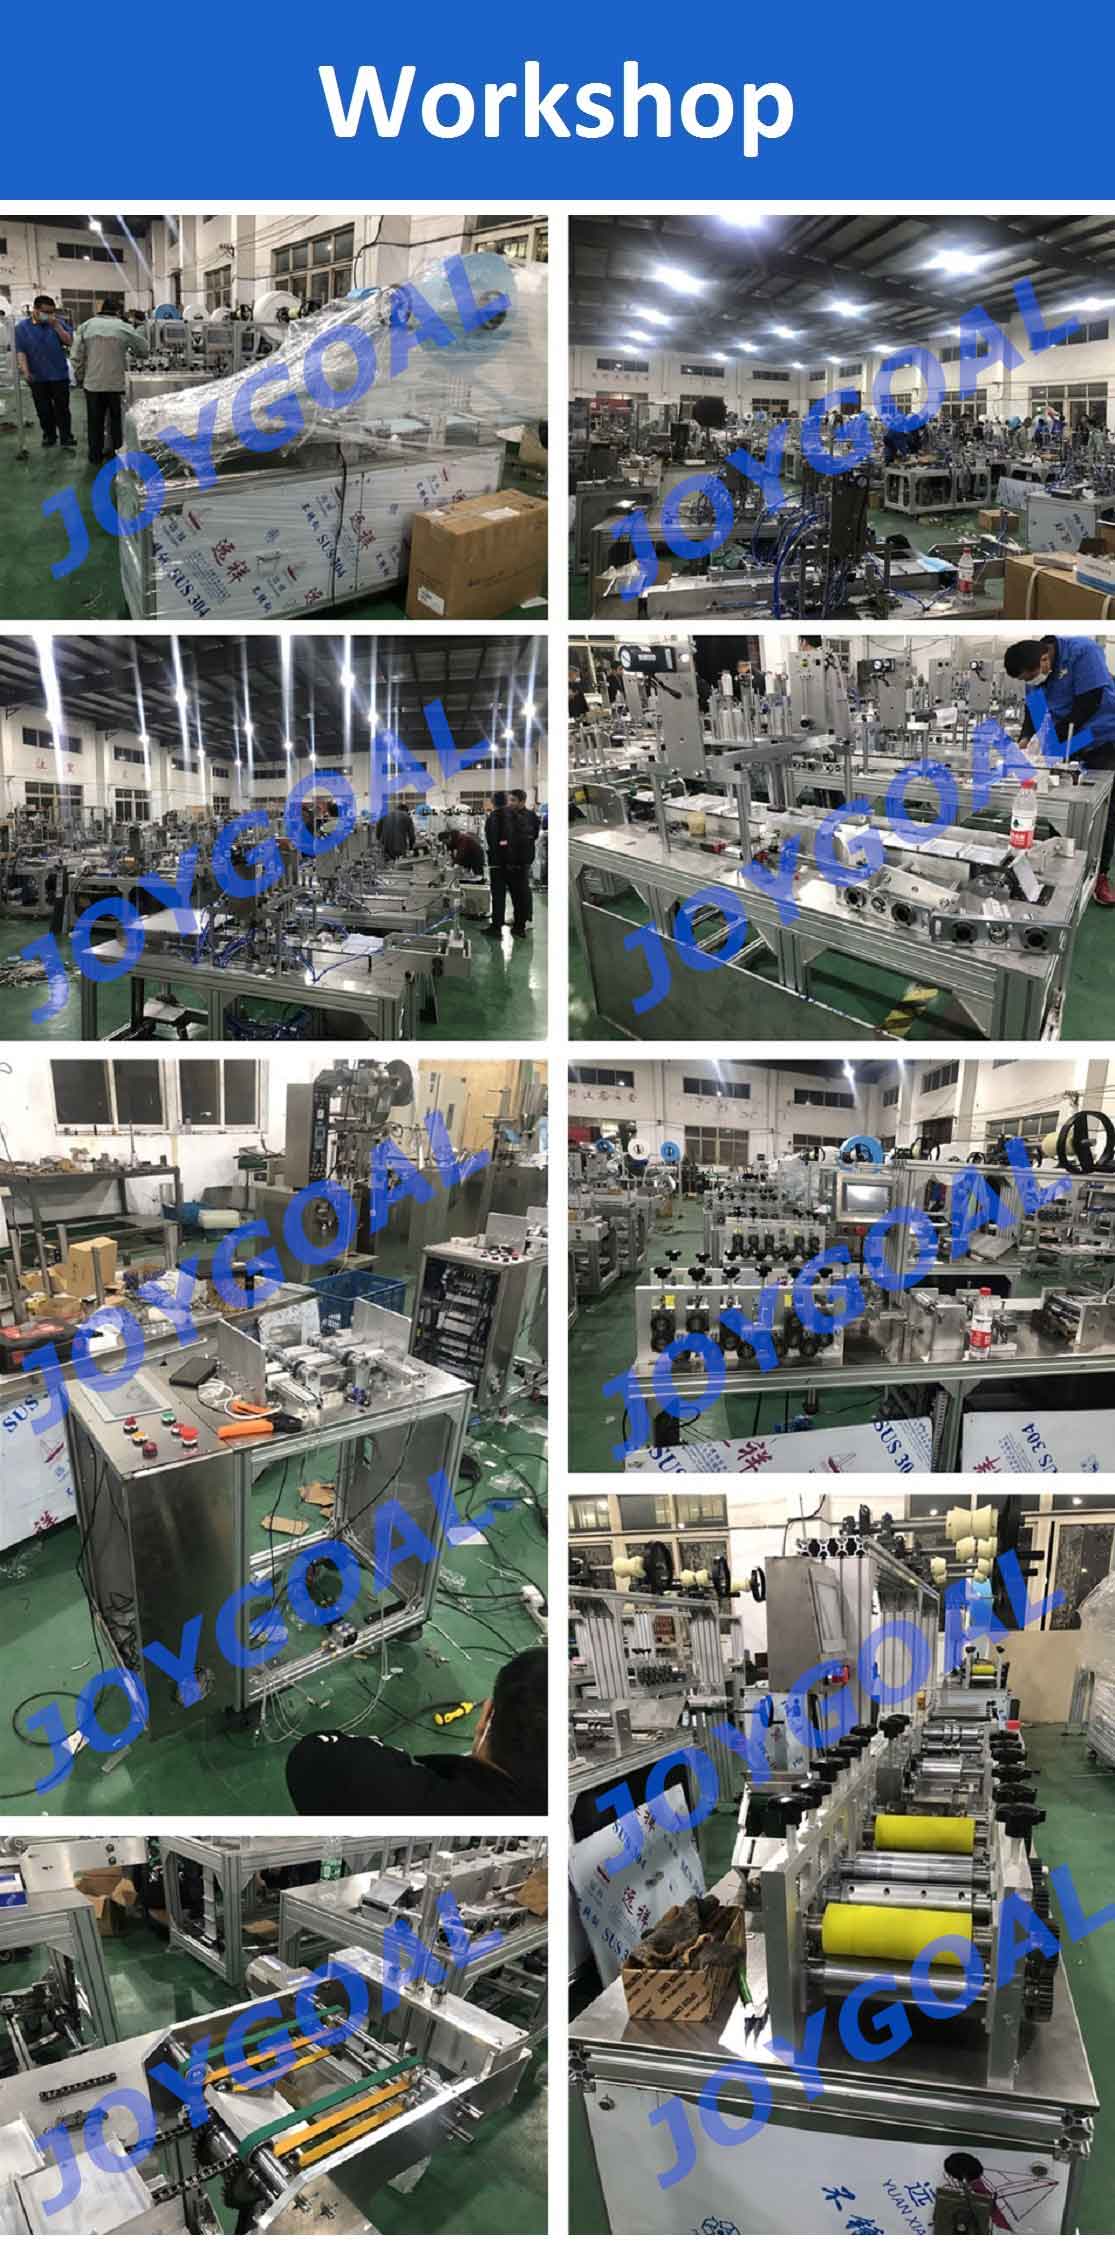 fully automatic 3 ply non woven disposable medical surgical face mask production line making machine